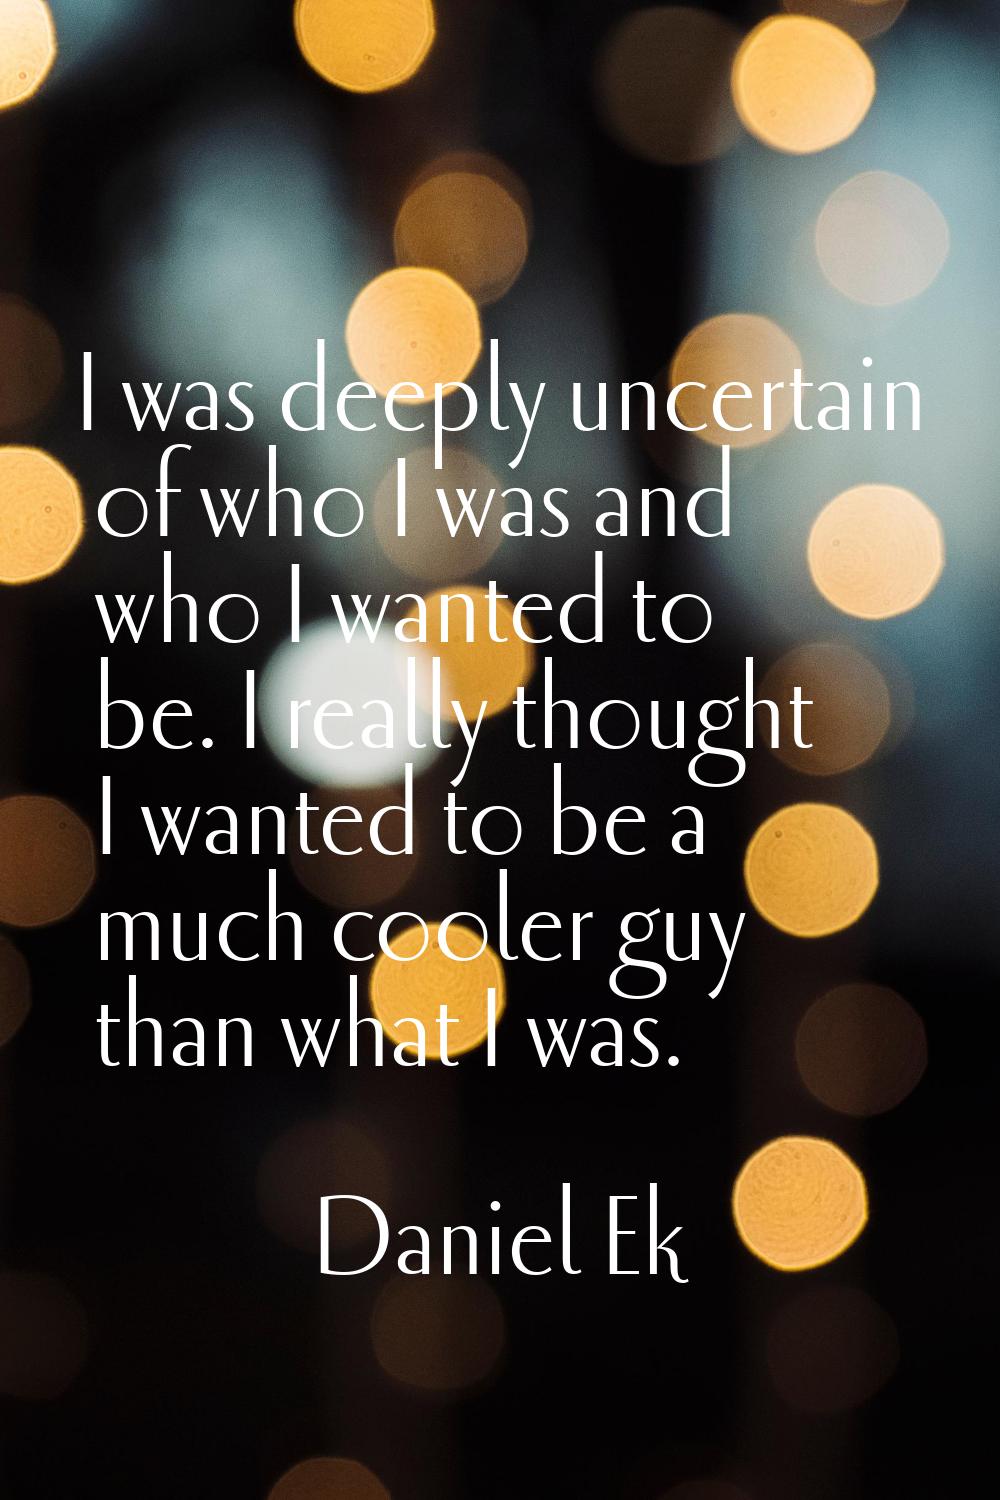 I was deeply uncertain of who I was and who I wanted to be. I really thought I wanted to be a much 